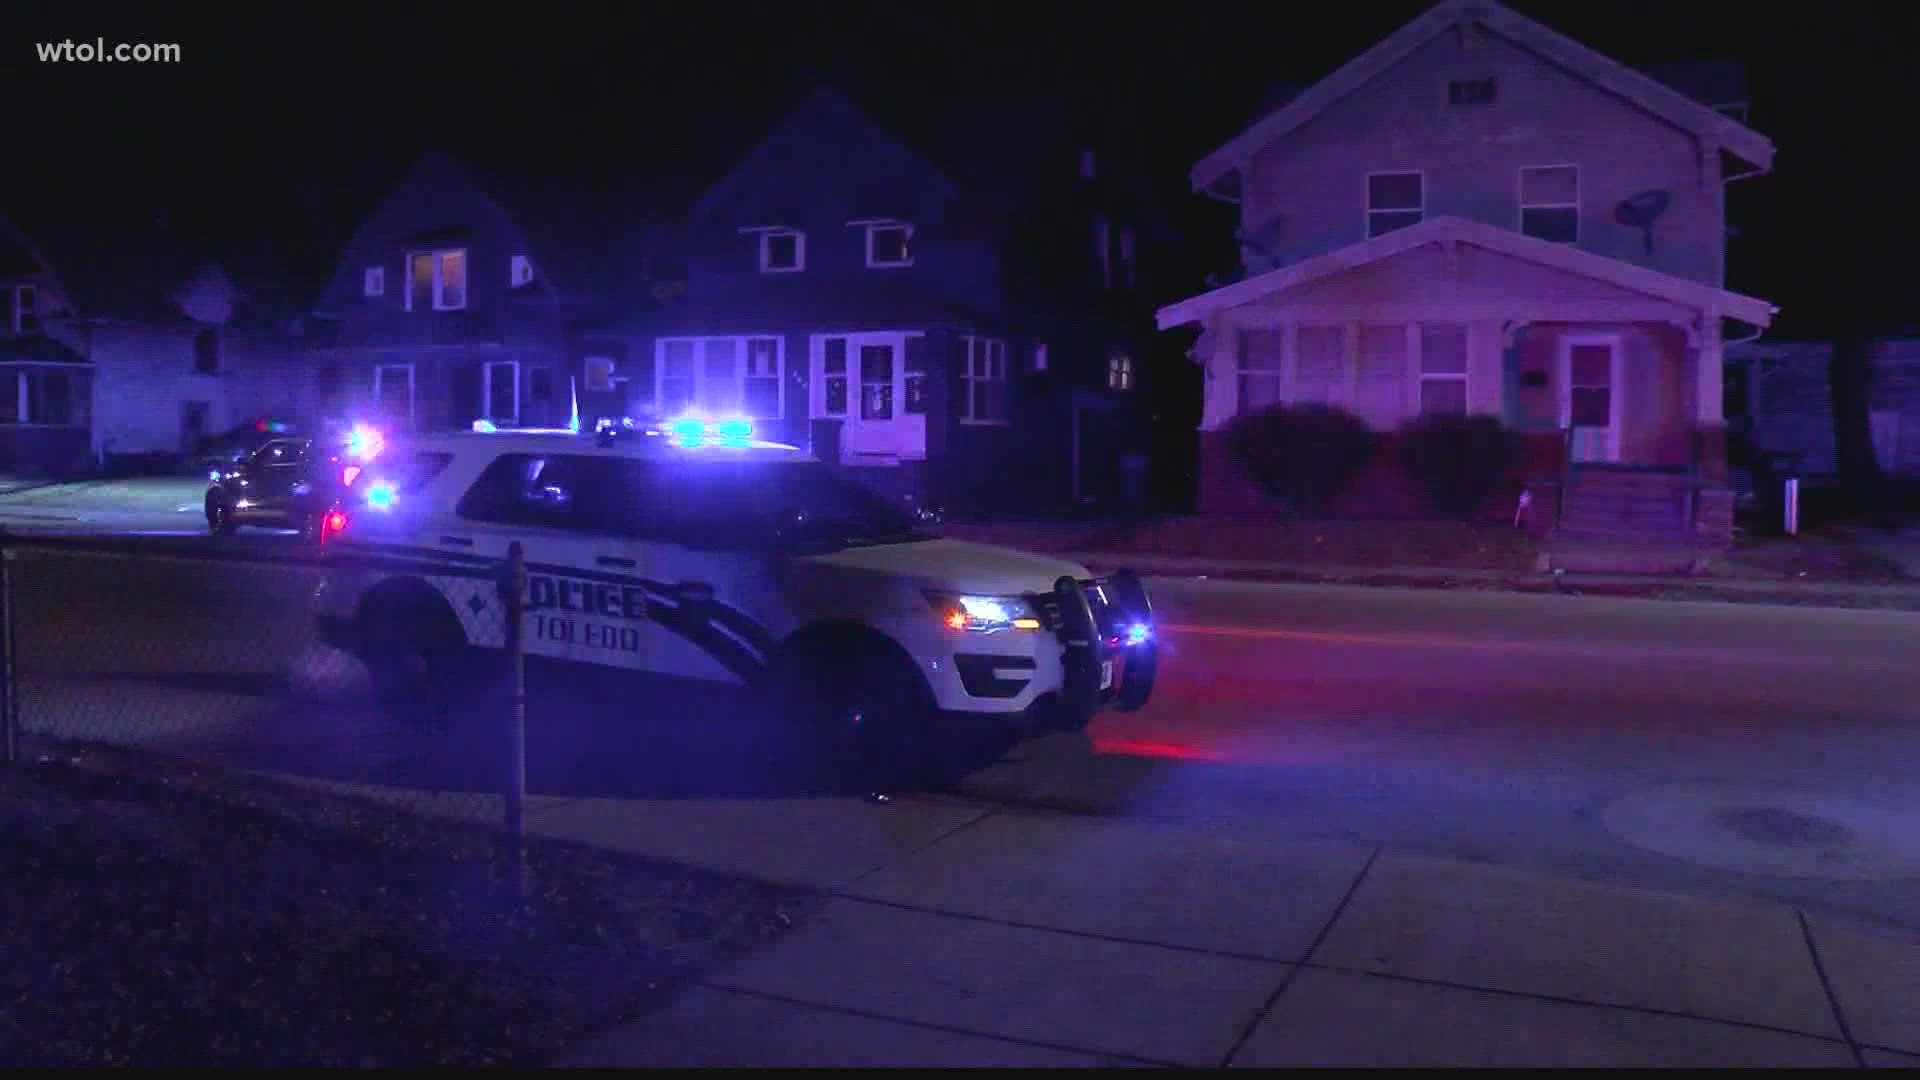 A violent night in Toledo leaves police investigating two shootings.